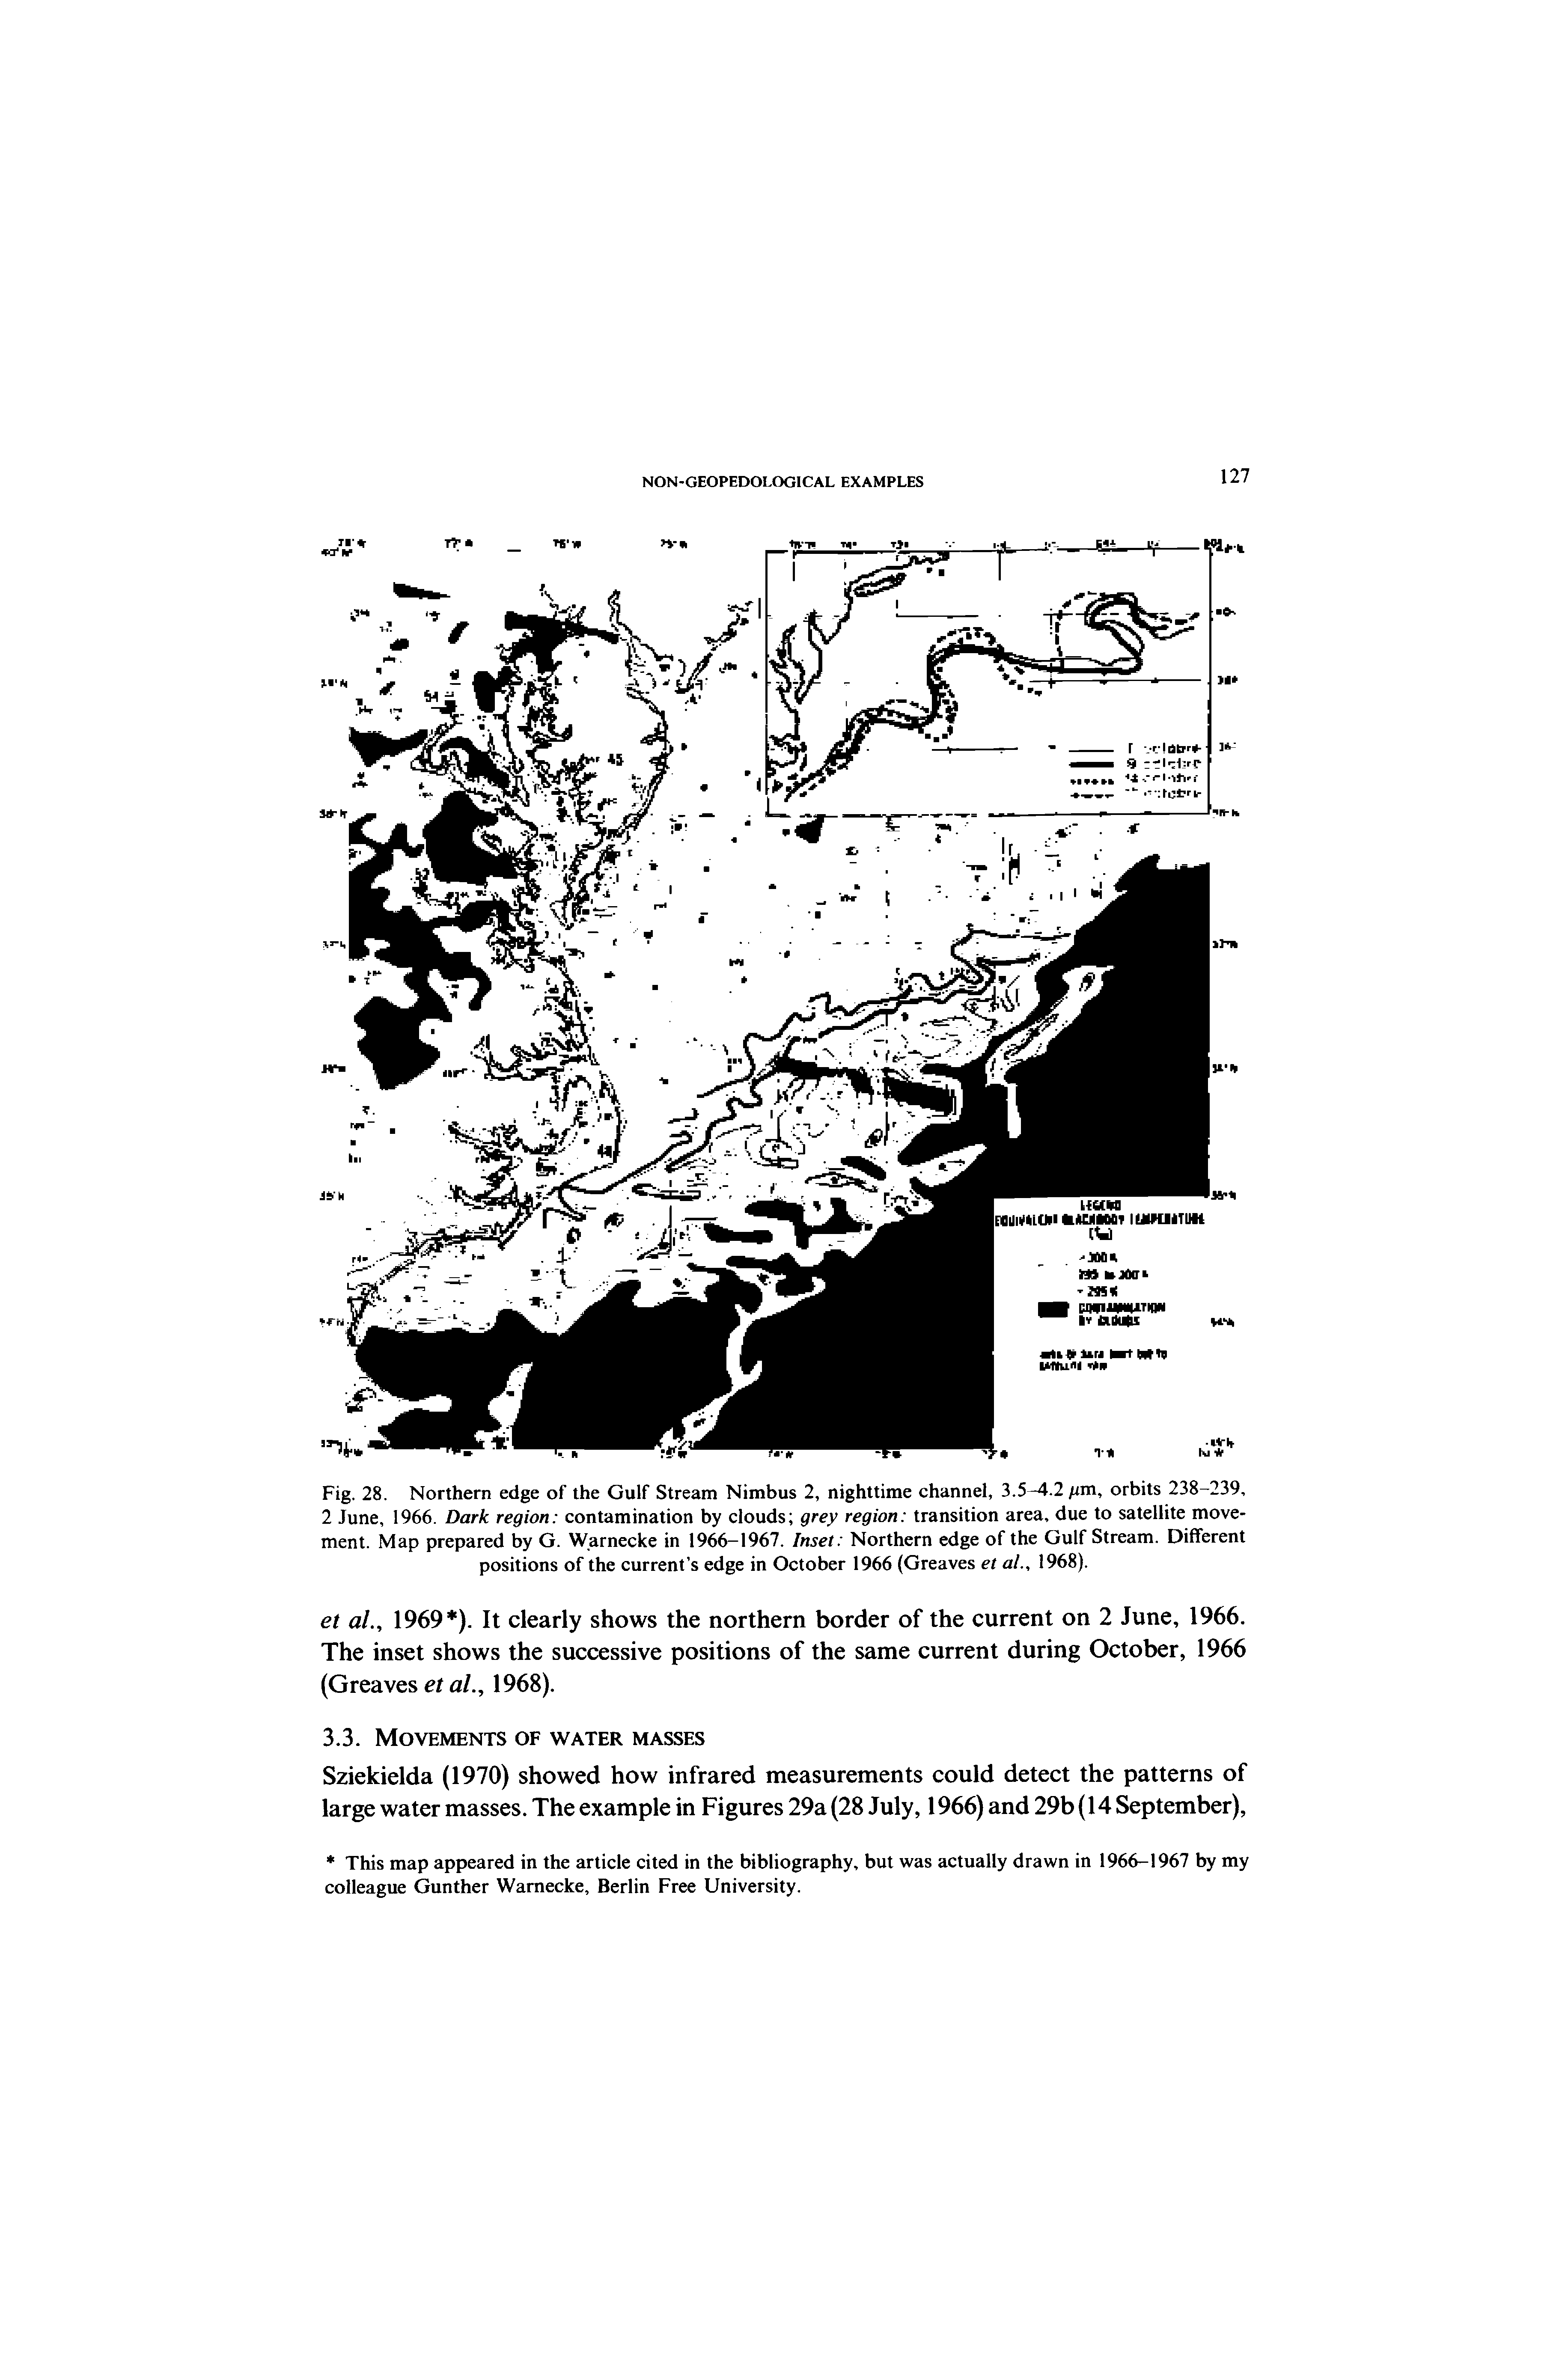 Fig. 28. Northern edge of the Gulf Stream Nimbus 2, nighttime channel, 3.5-4.2 / m, orbits 238-239, 2 June, 1966. Dark region contamination by clouds grey region transition area, due to satellite movement. Map prepared by G. Warnecke in 1966-1967. Inset Northern edge of the Gulf Stream. Different positions of the current s edge in October 1966 (Greaves et al., 1968).